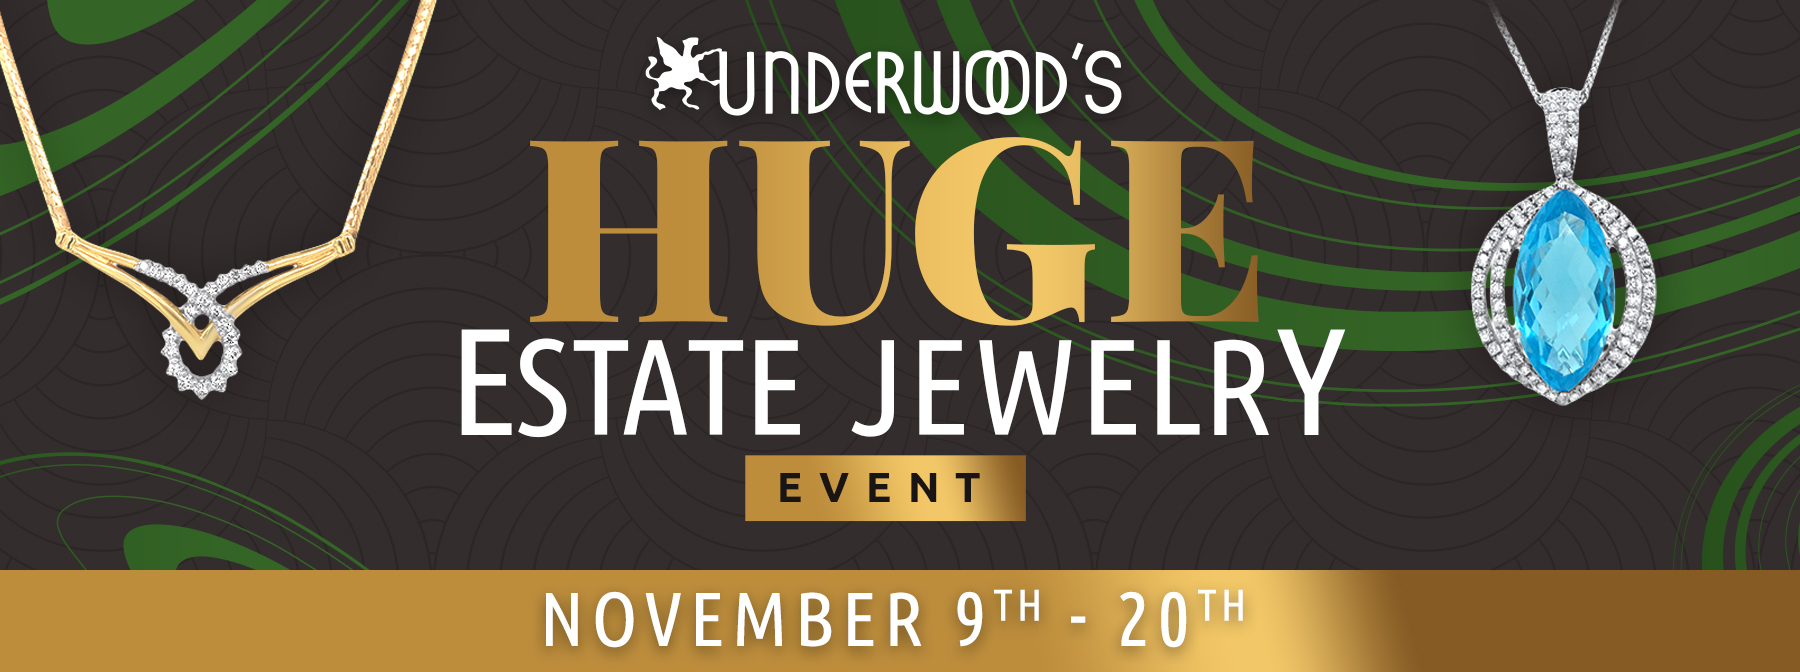 Underwood's HUGE estate Jewelry Event- November 9th-20th